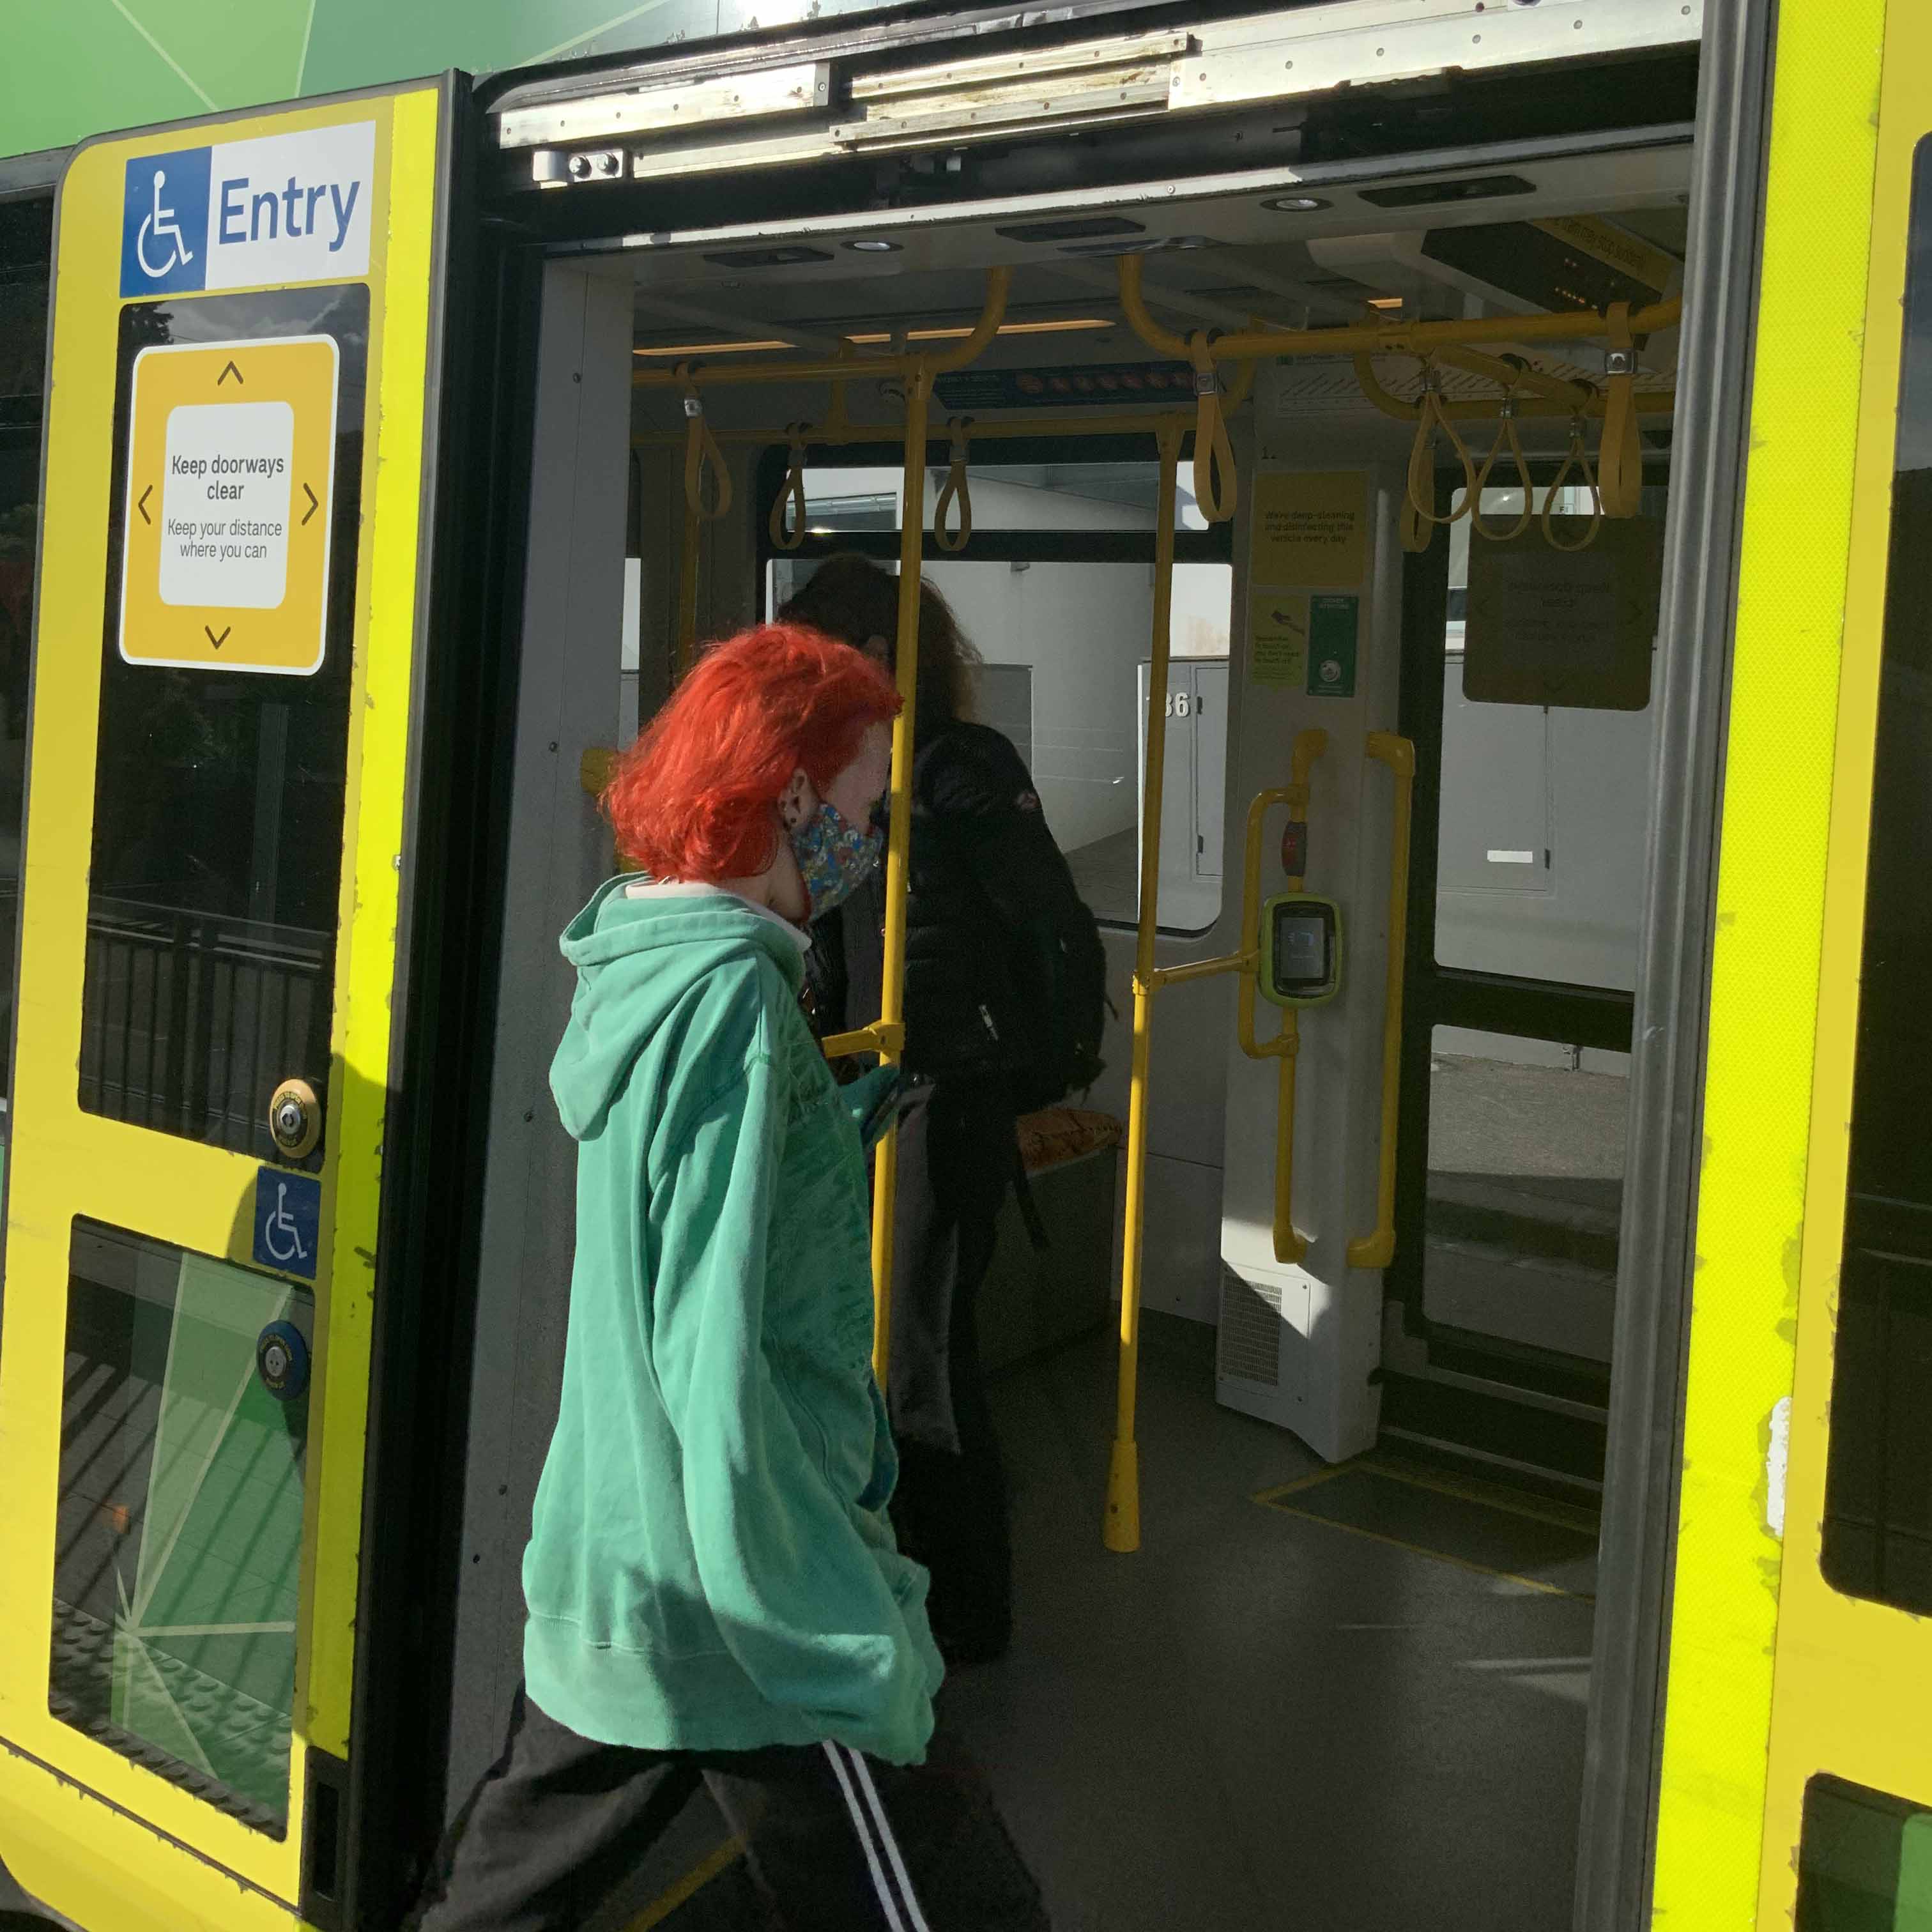 Image shows a person wearing a mask boarding a tram during the COVID-19 pandemic.